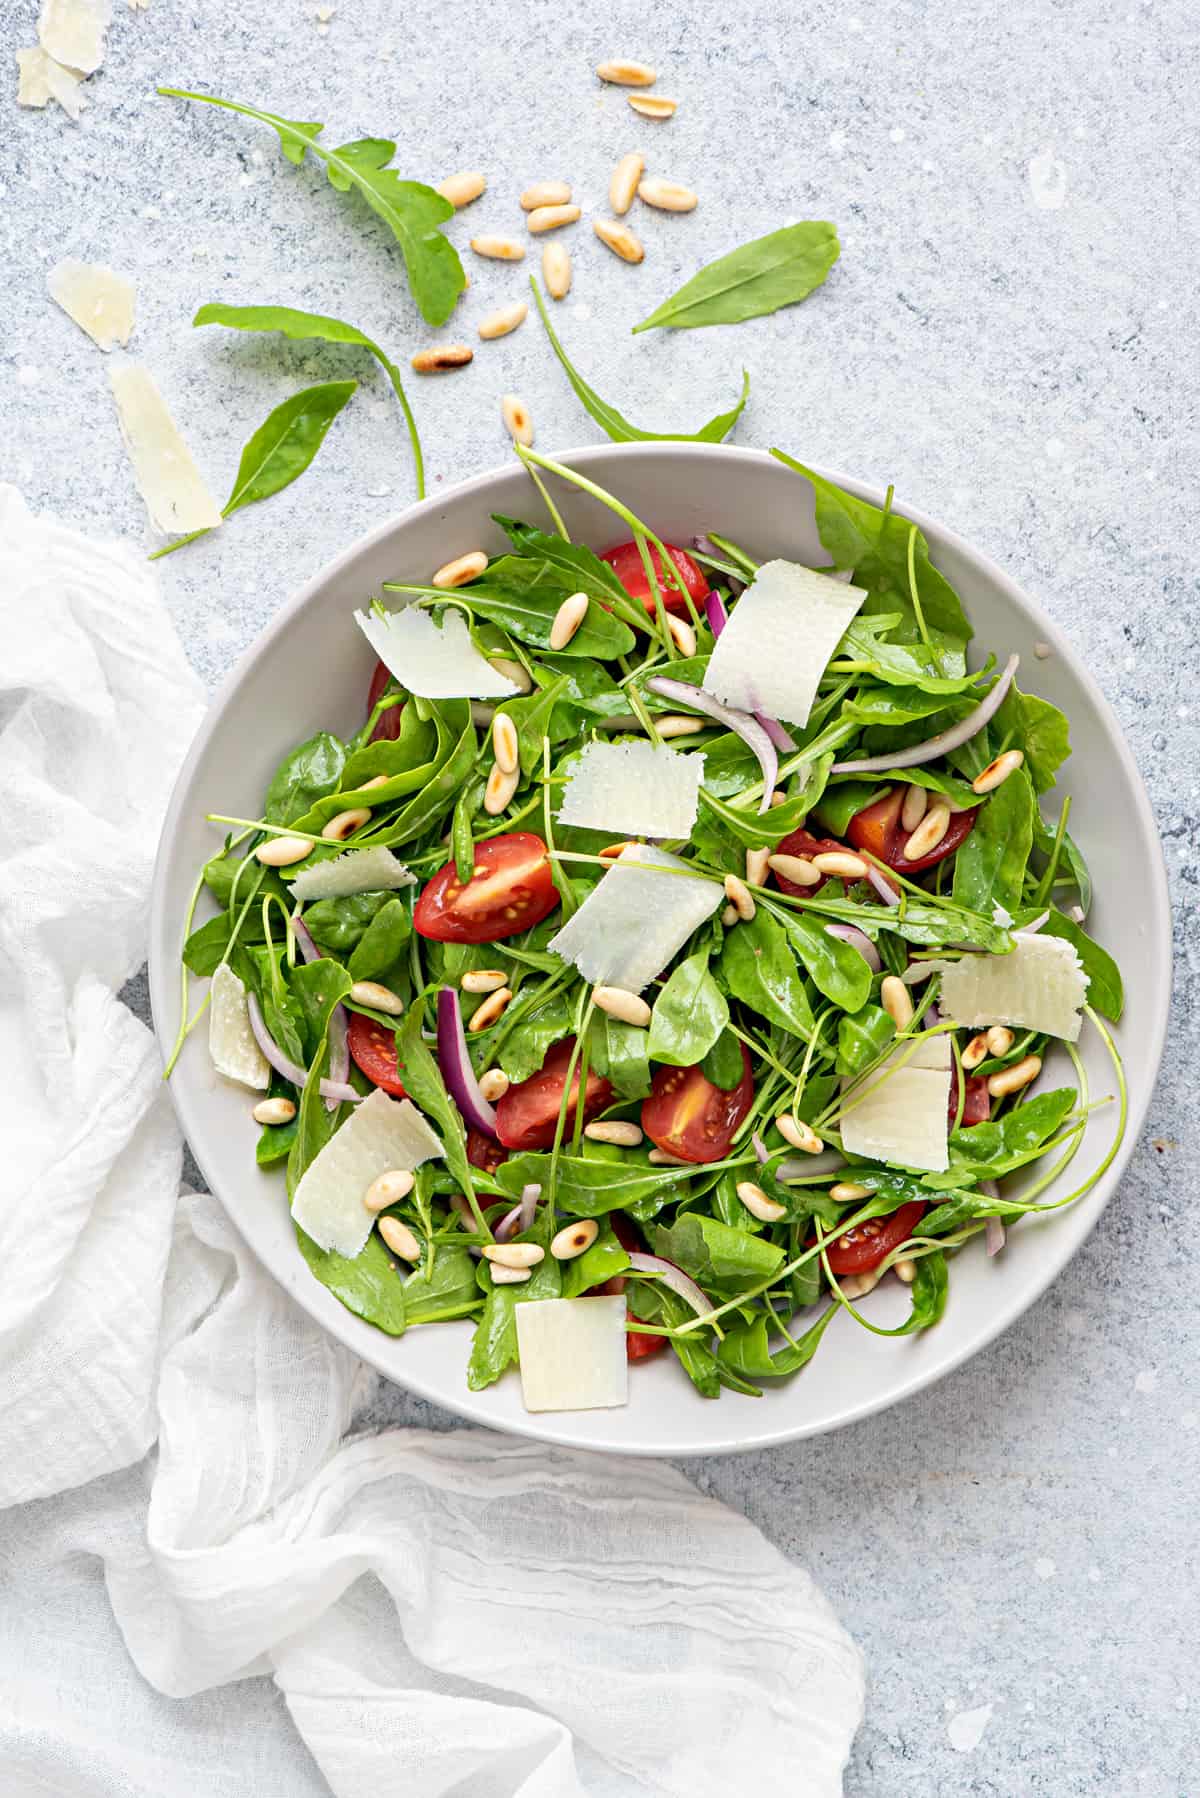 one bowl of arugula salad with pine nuts, parmesan, tomatoes, onions 